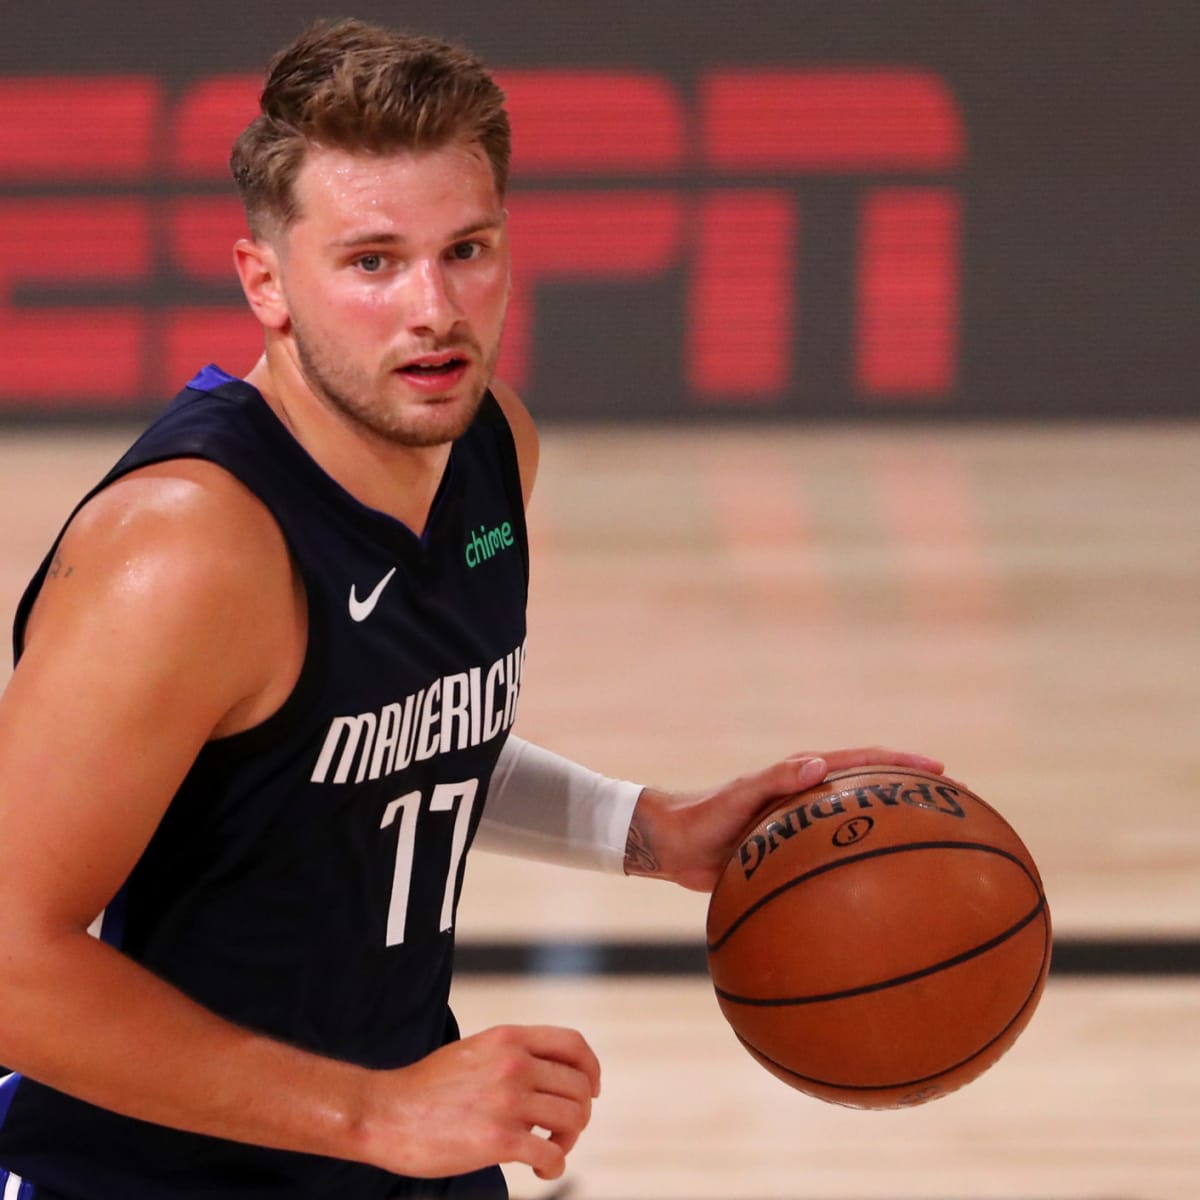 NBA: Kristaps Porzingis and Luka Doncic to play together in Dallas